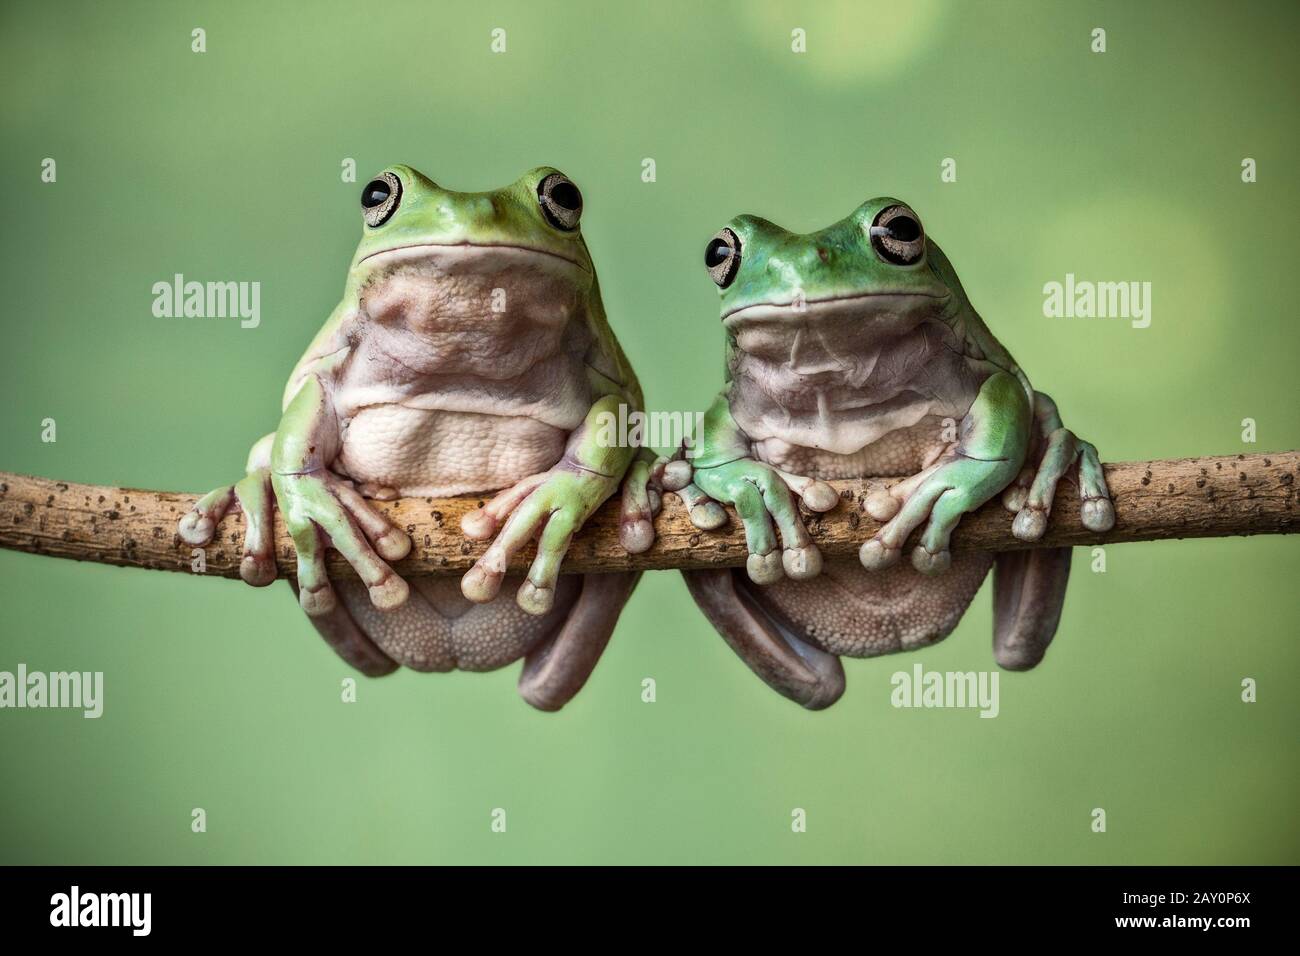 Two dumpy tree frogs sitting on a branch, Indonesia Stock Photo